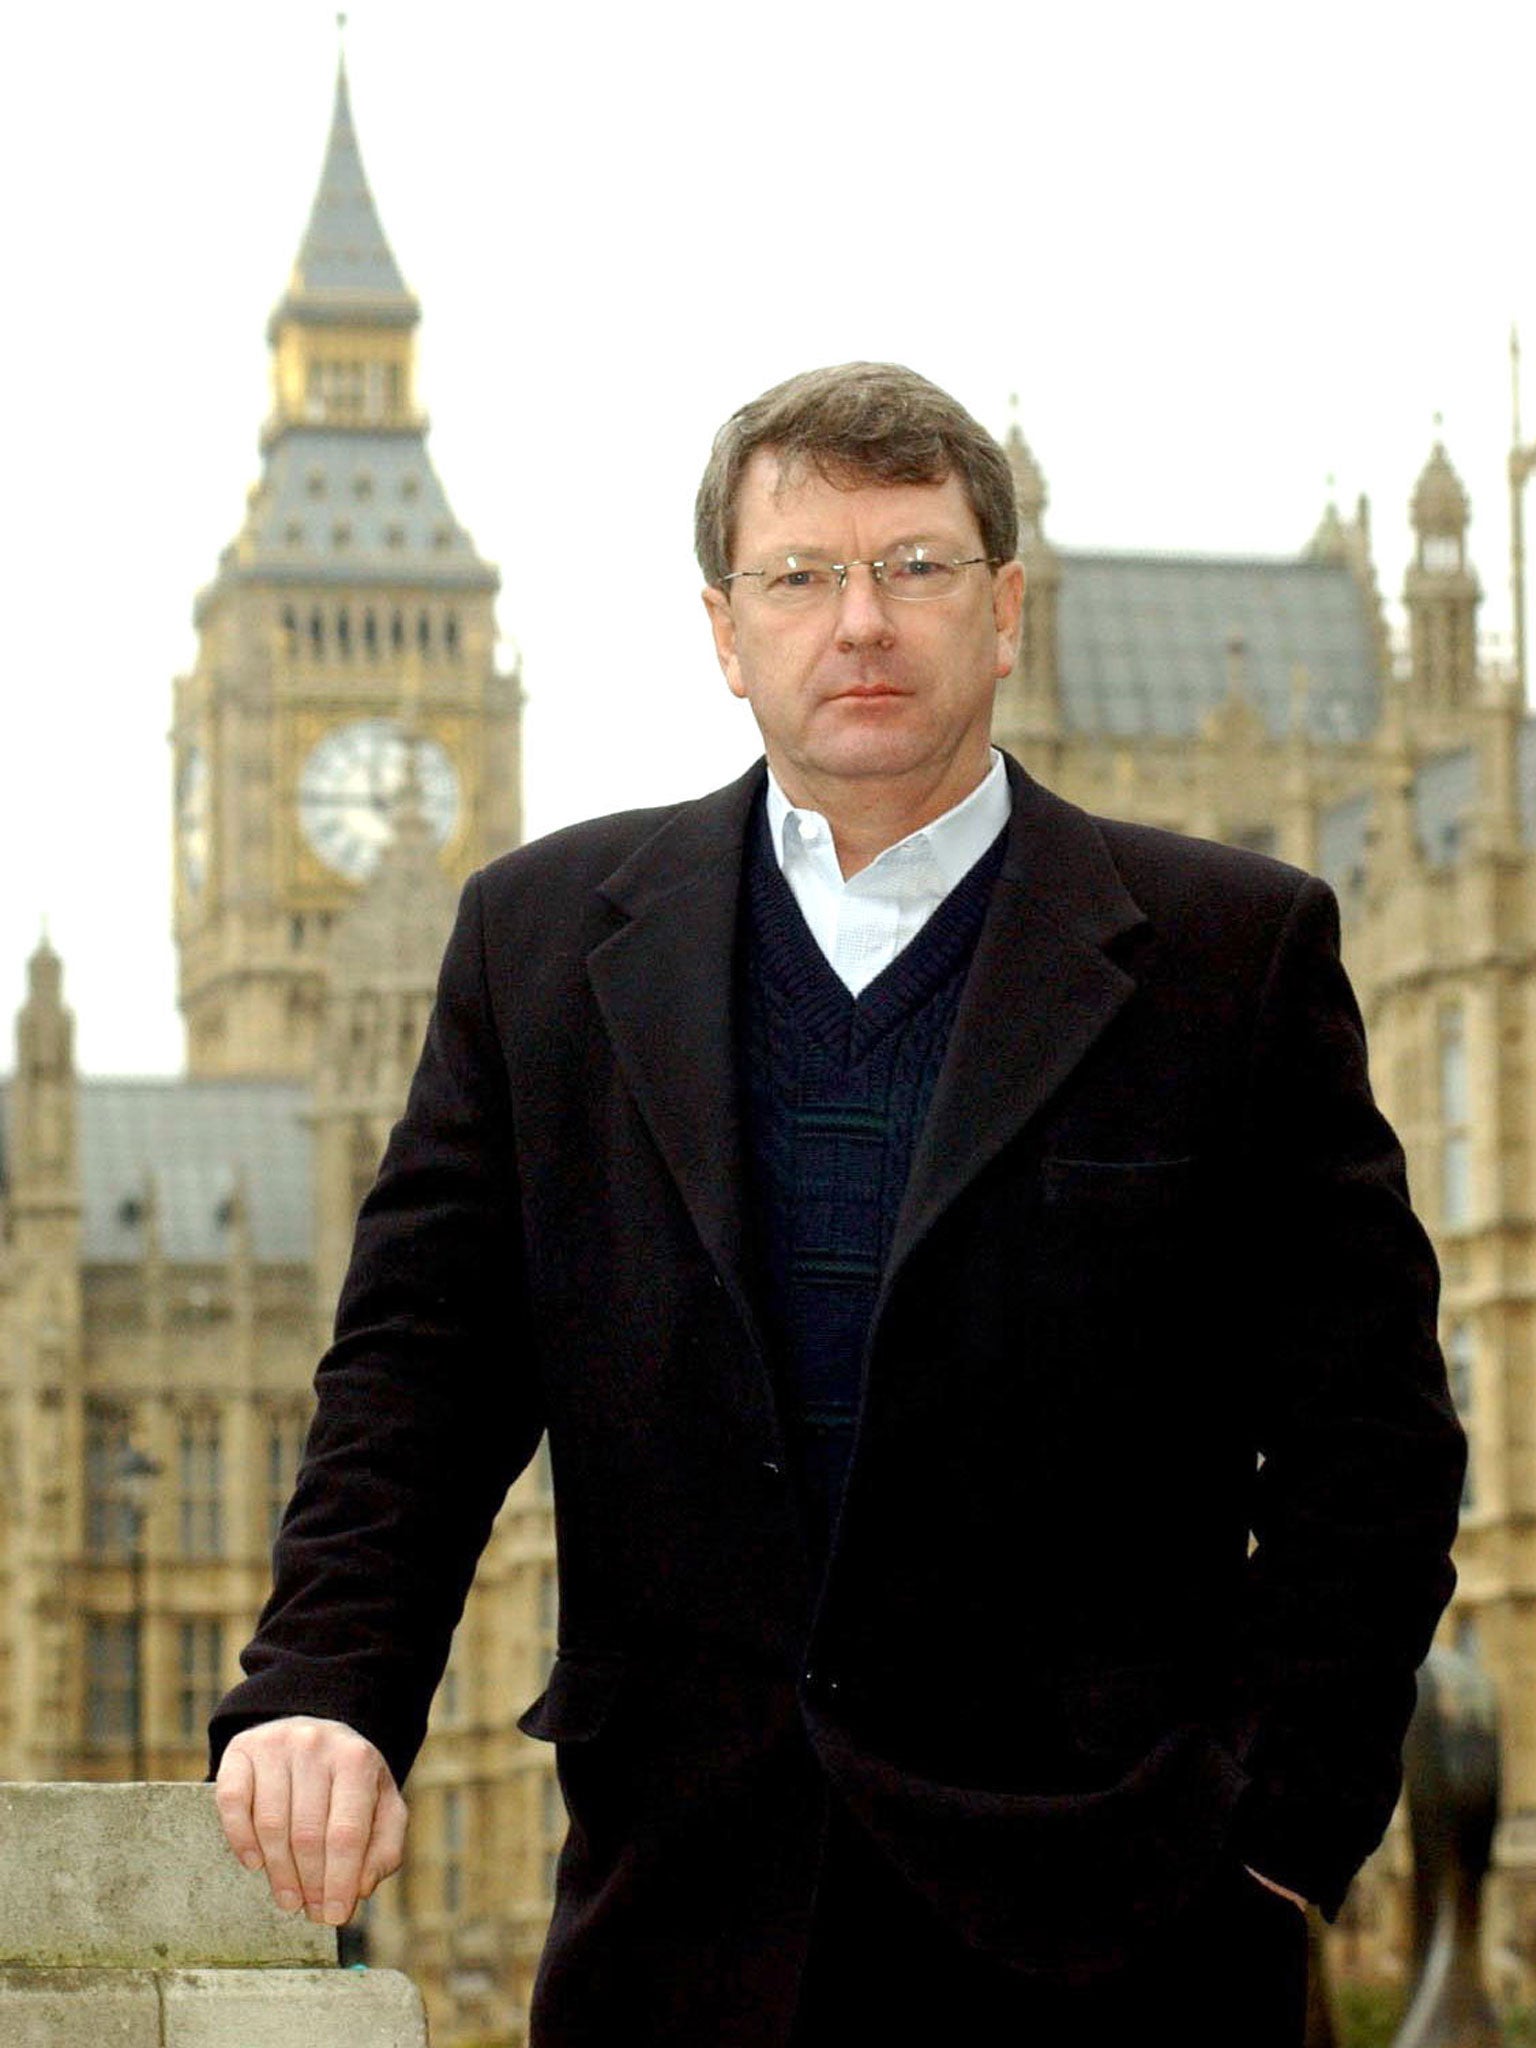 David Cameron has signed up election guru Lynton Crosby to work full time on securing a Tory general election victory in a £500,000 deal